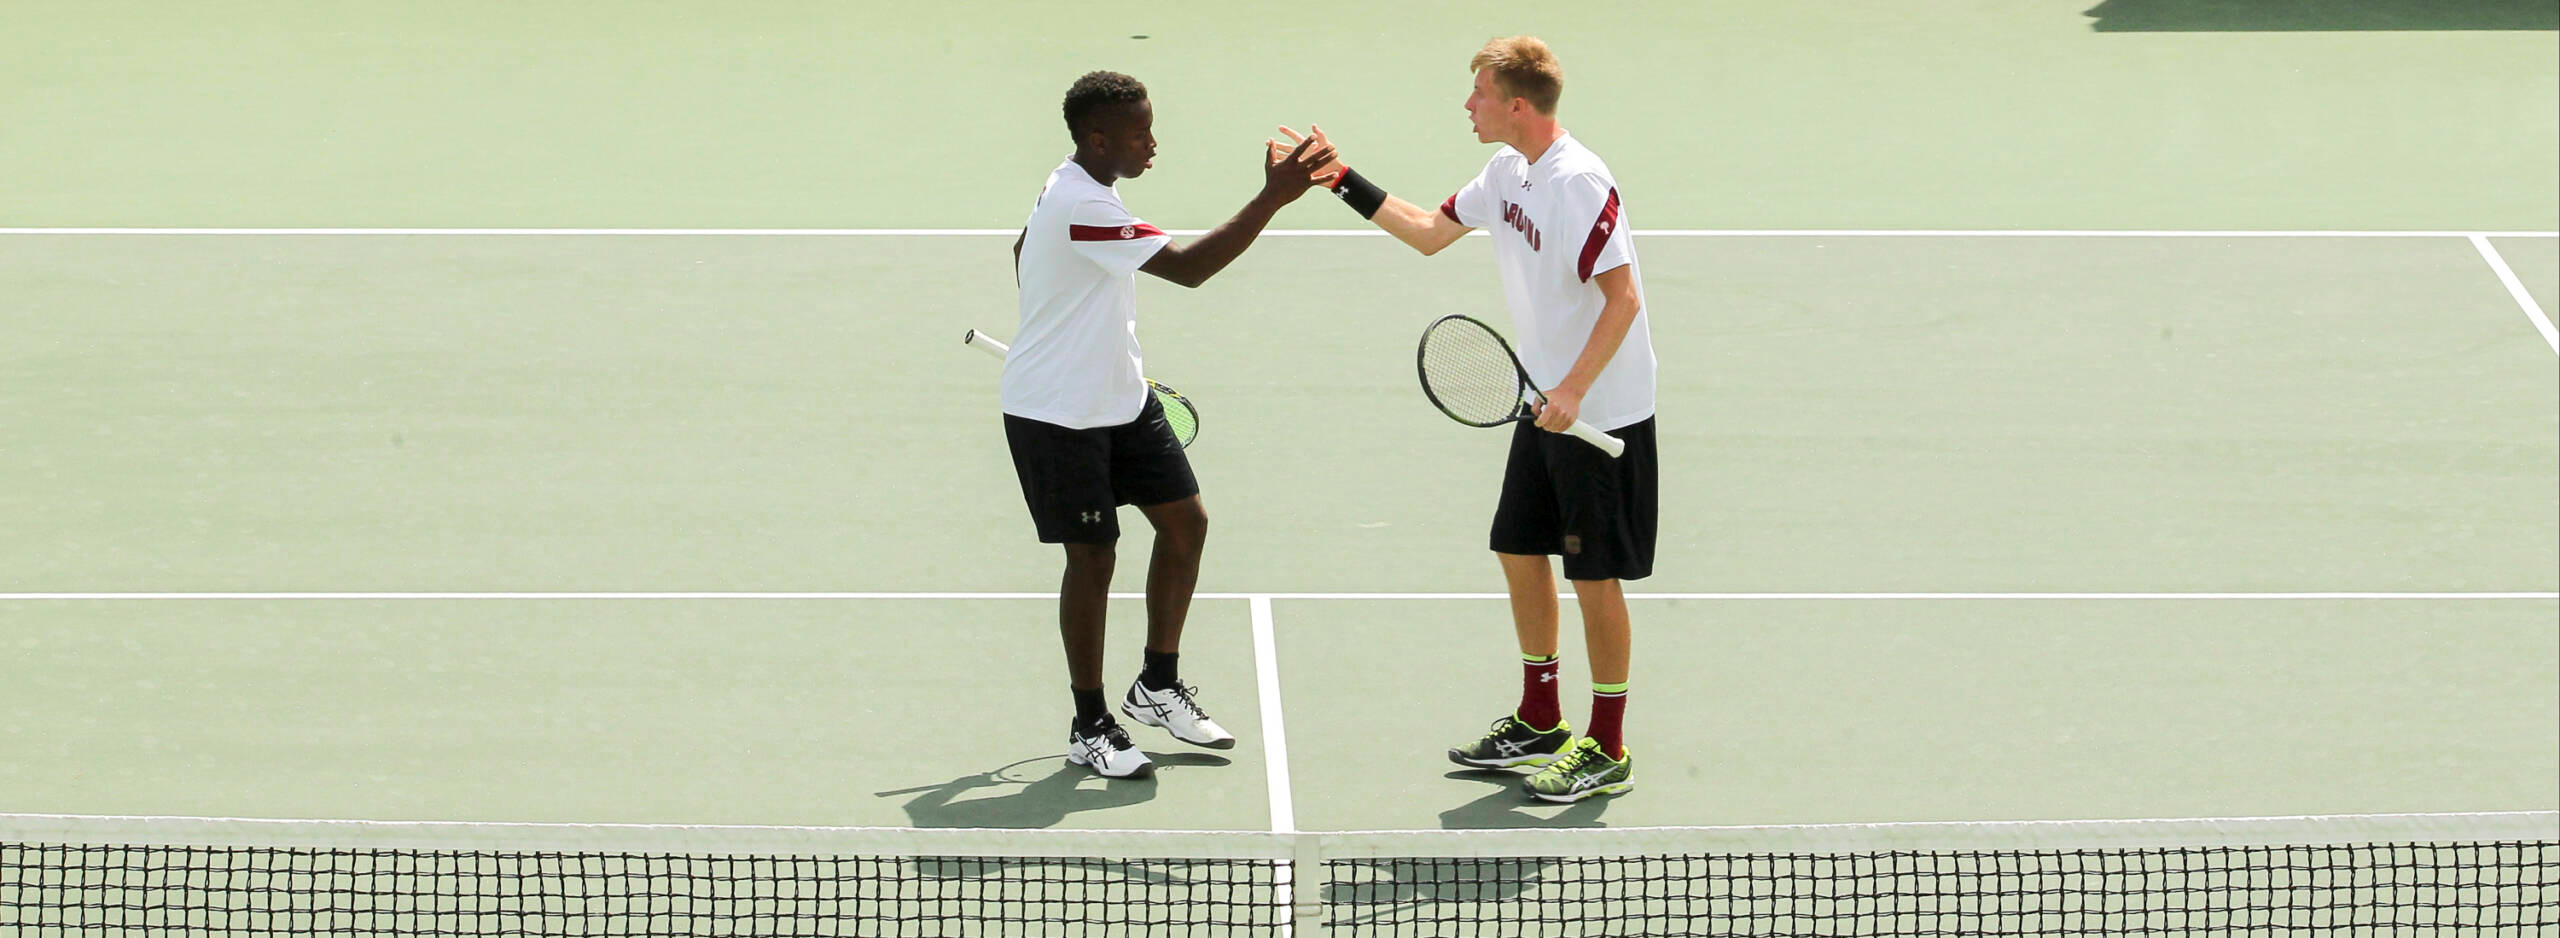 O'Keefe/Dennis Fall in First Round of NCAA Championships